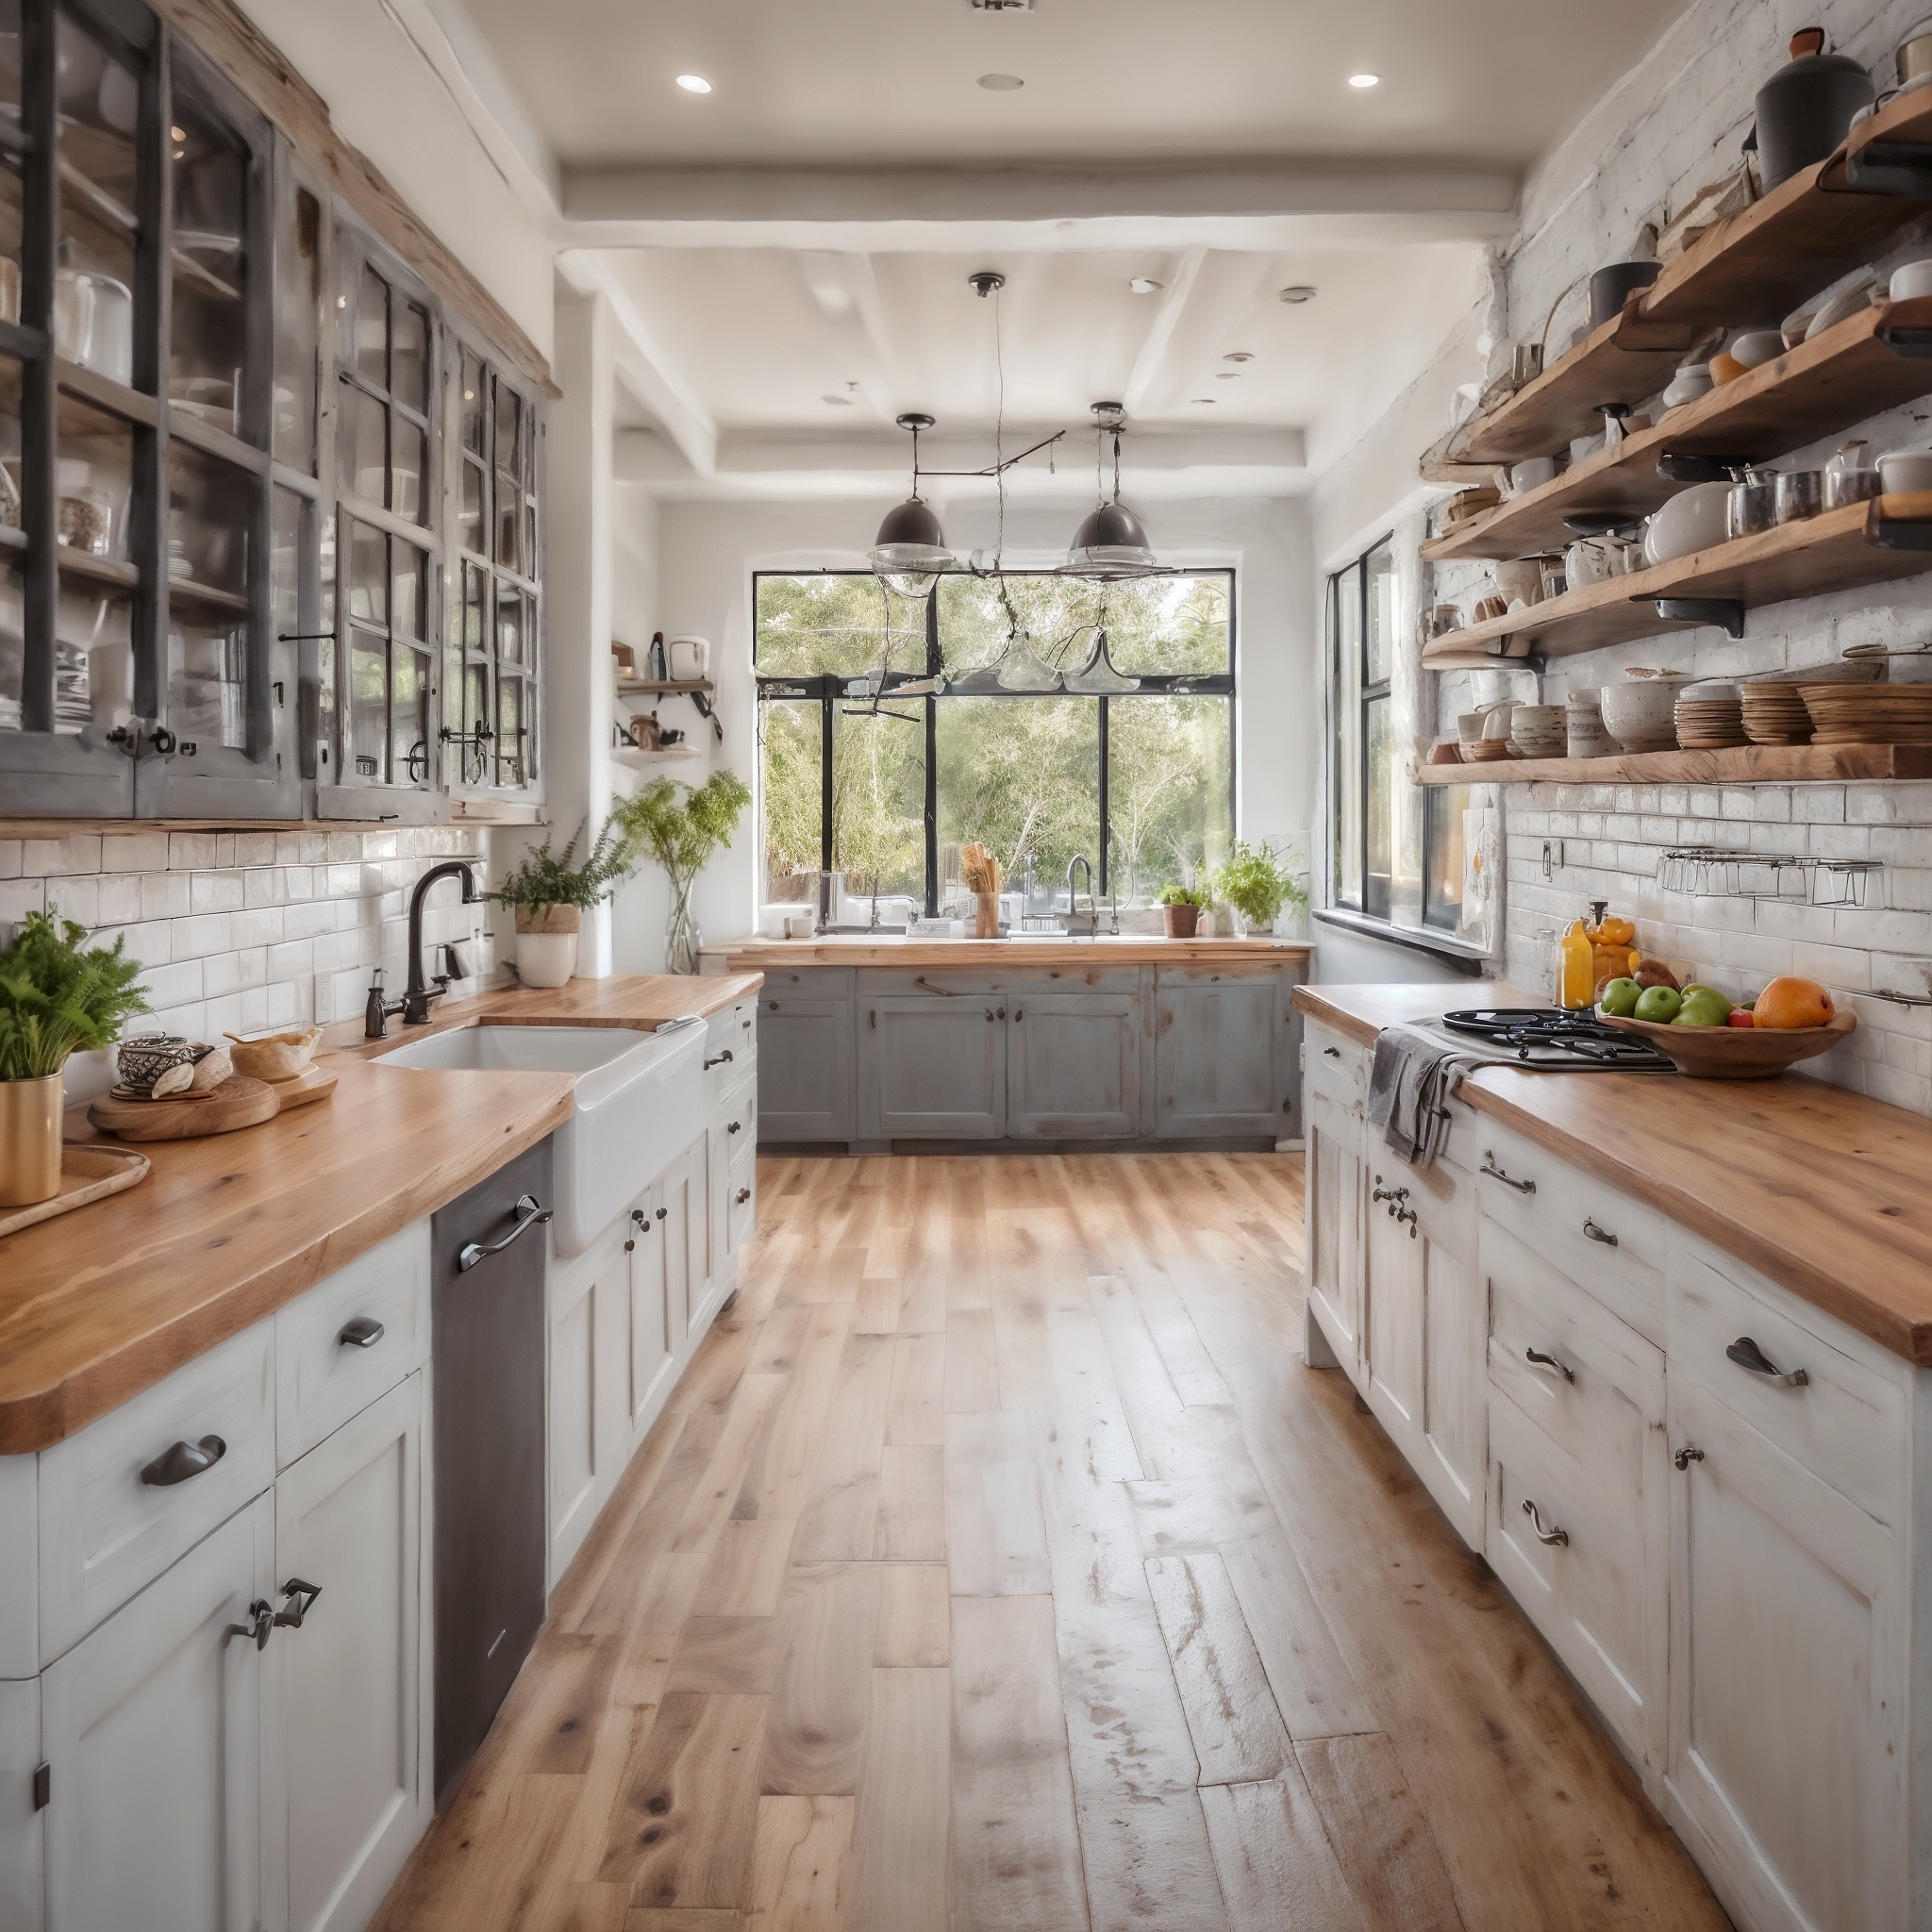 Modern Farmhouse Kitchen Layout with Shaker-style Cabinets, White Subway Tile Backsplash, Wooden Countertop, Apron-front sink, Open shelving